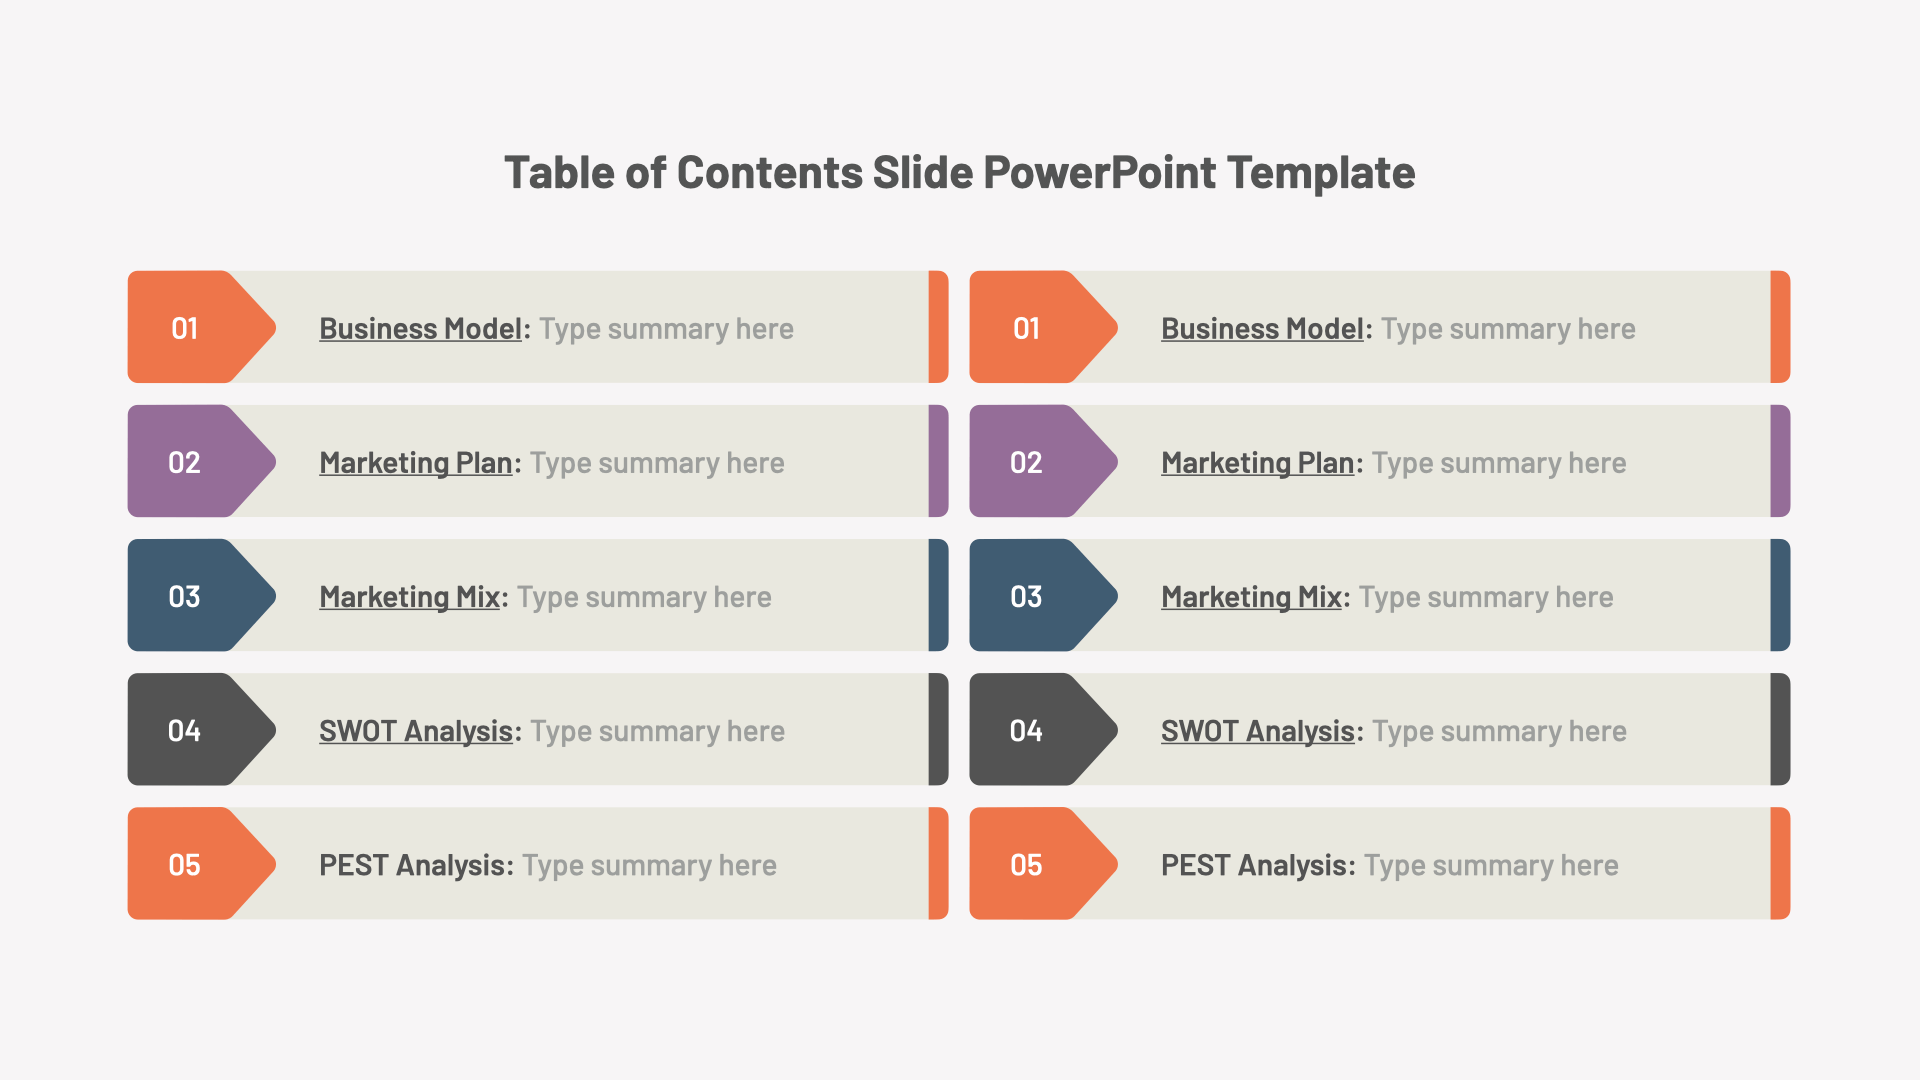 table-of-contents-slide-powerpoint-template-okslides